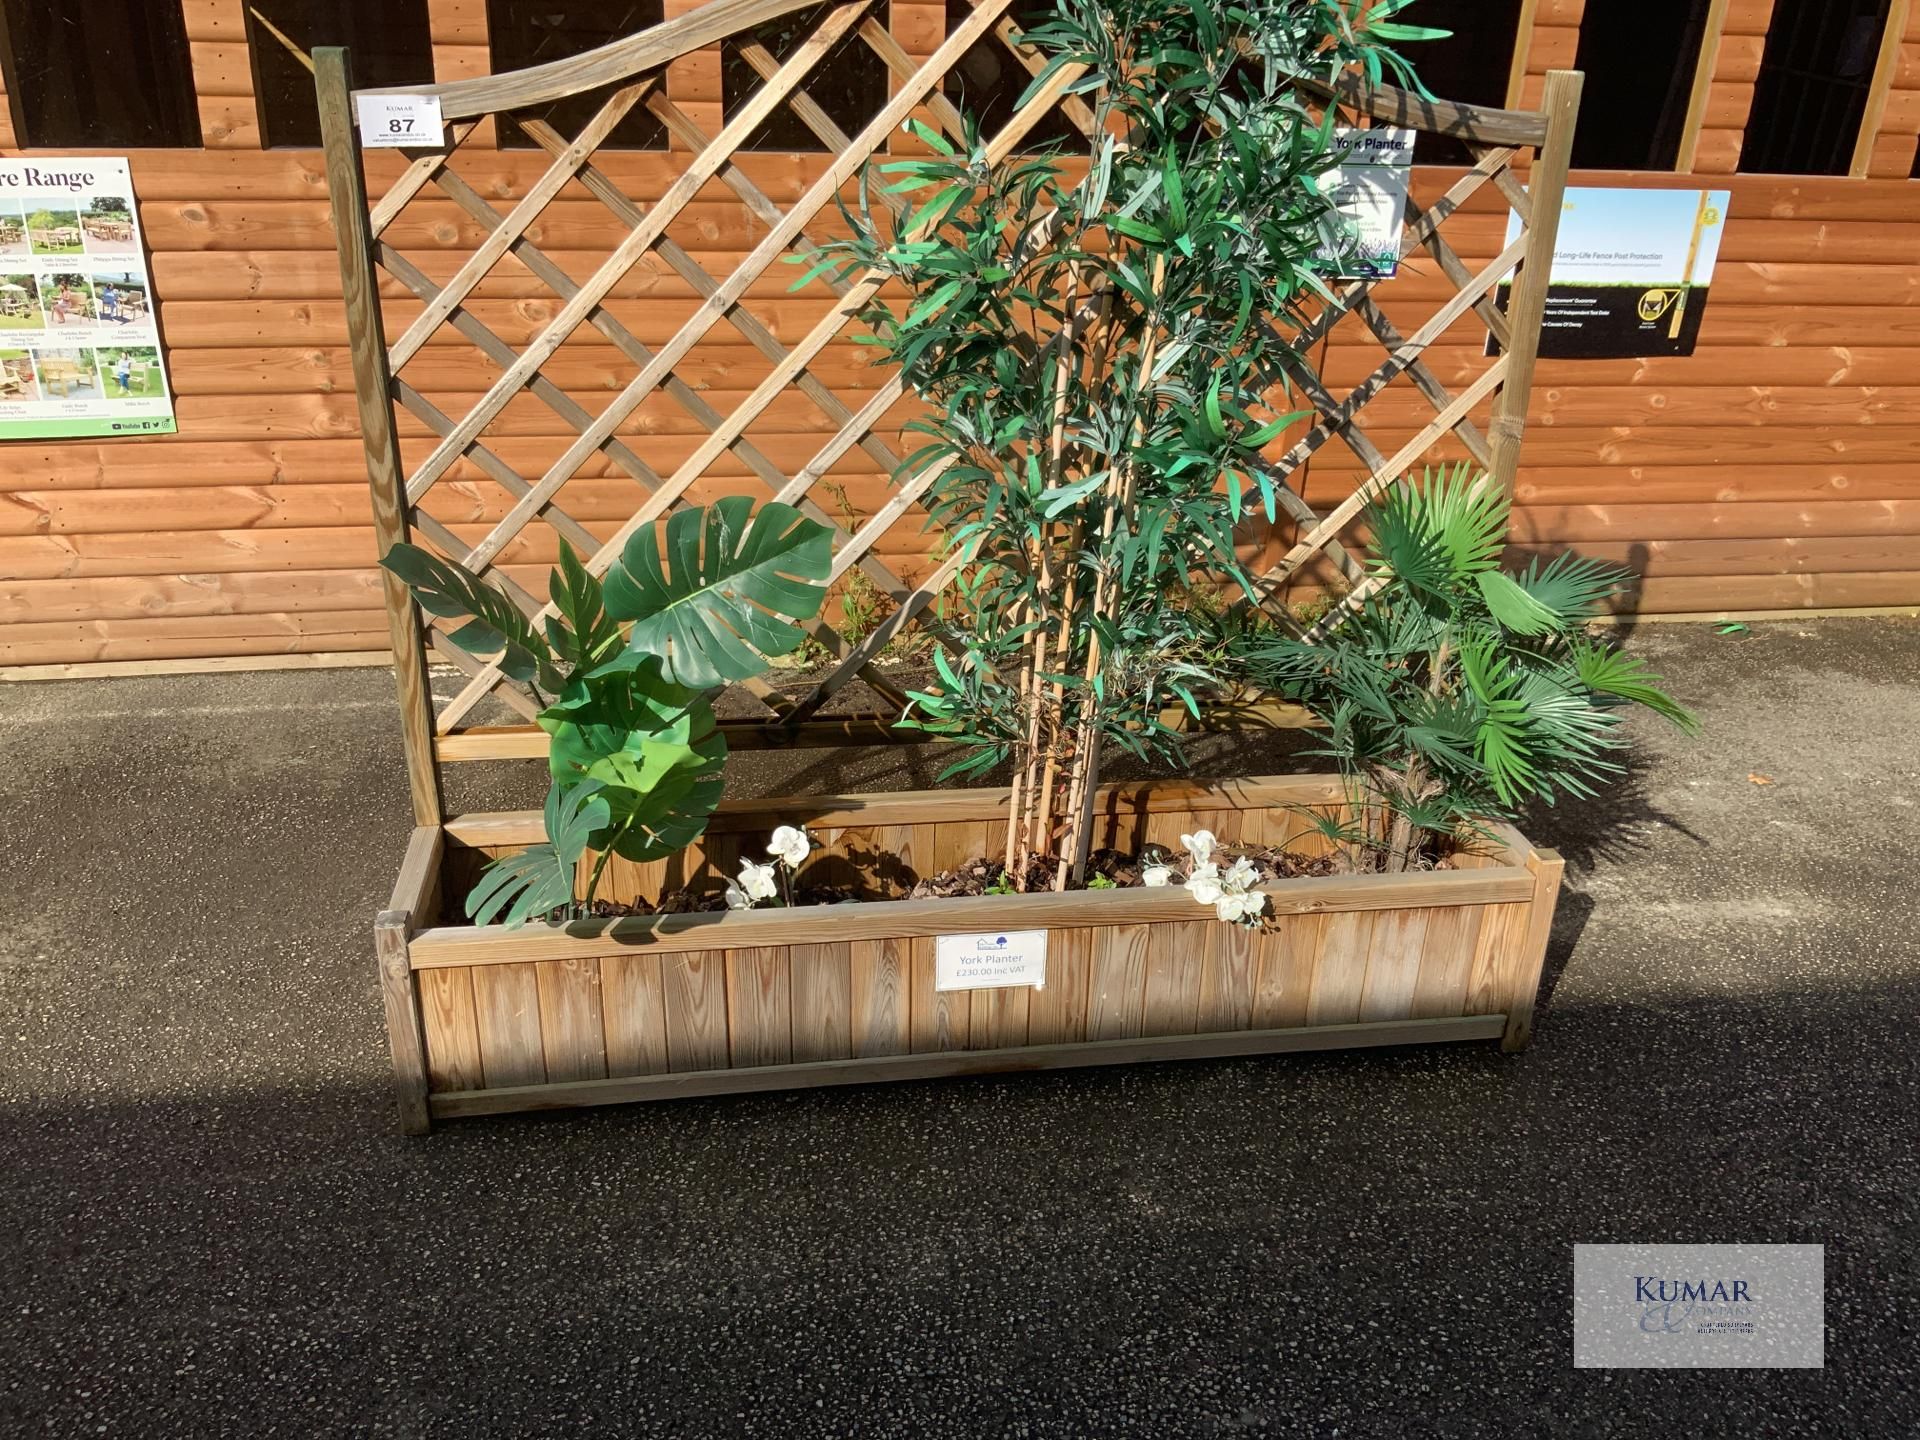 York Planter, Sizes (W x D x H) 1.80m x 0.4m x 1.65m RRP £230.00 with Contents As Shown